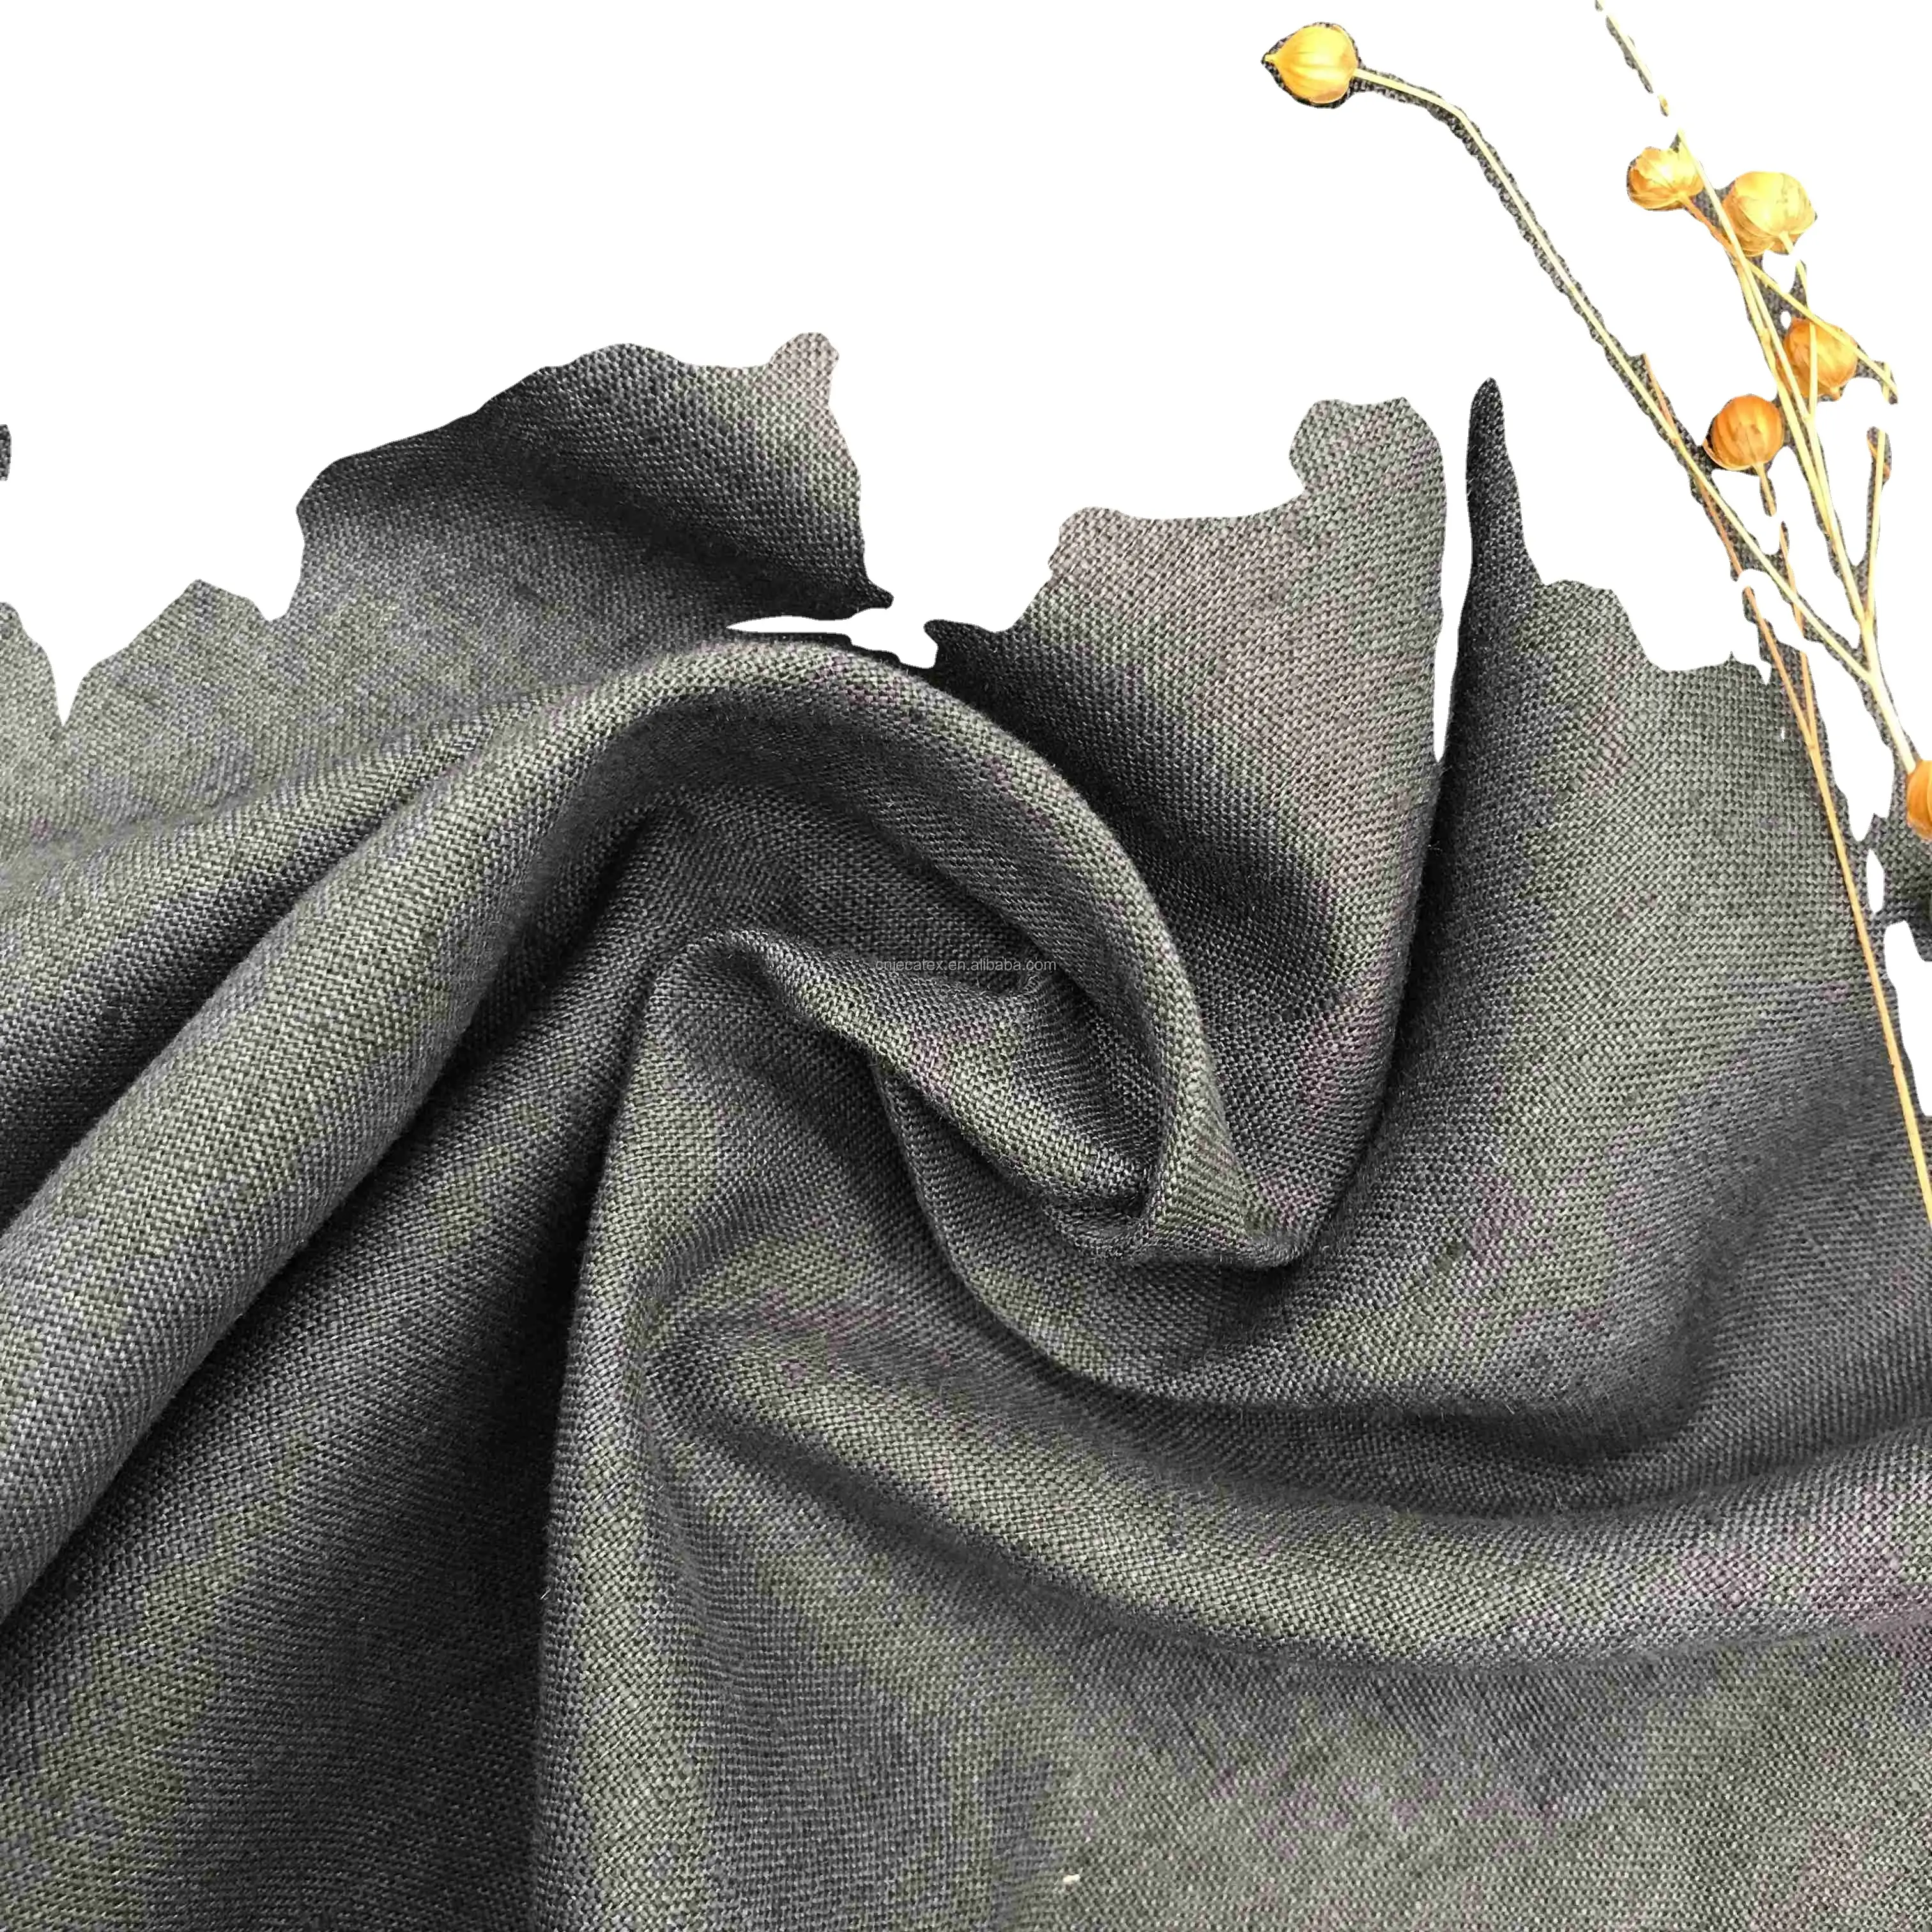 Jeca JECA/1B-ZS  GRS  Recycled 100% Linen Fabric Solid piece dyed  For Clothes  Home Textiles Wholesale  Woven  european flax